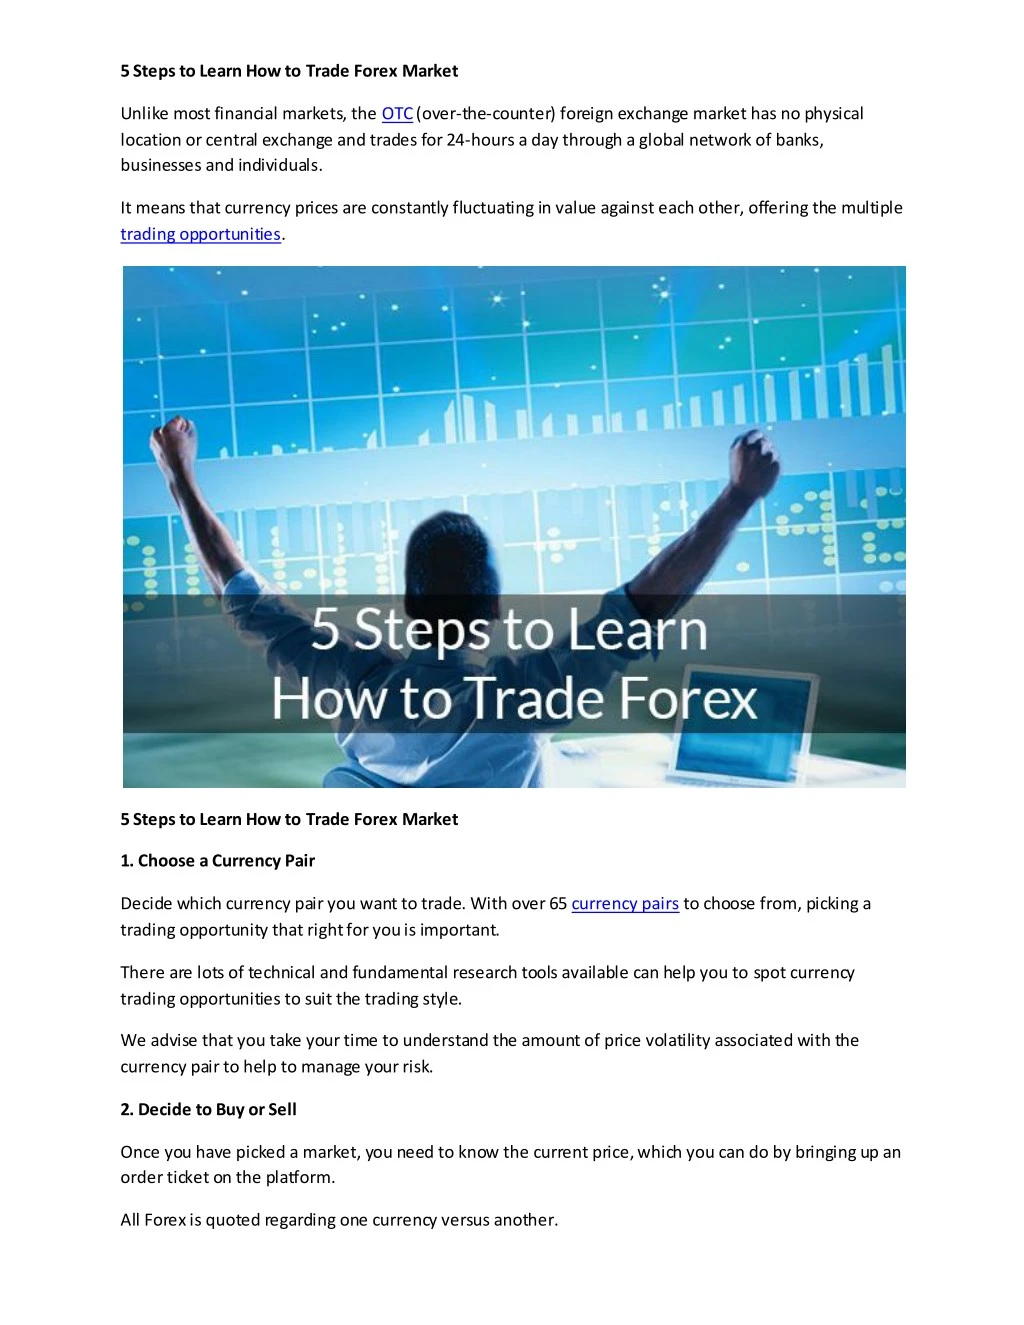 5 steps to learn how to trade forex market